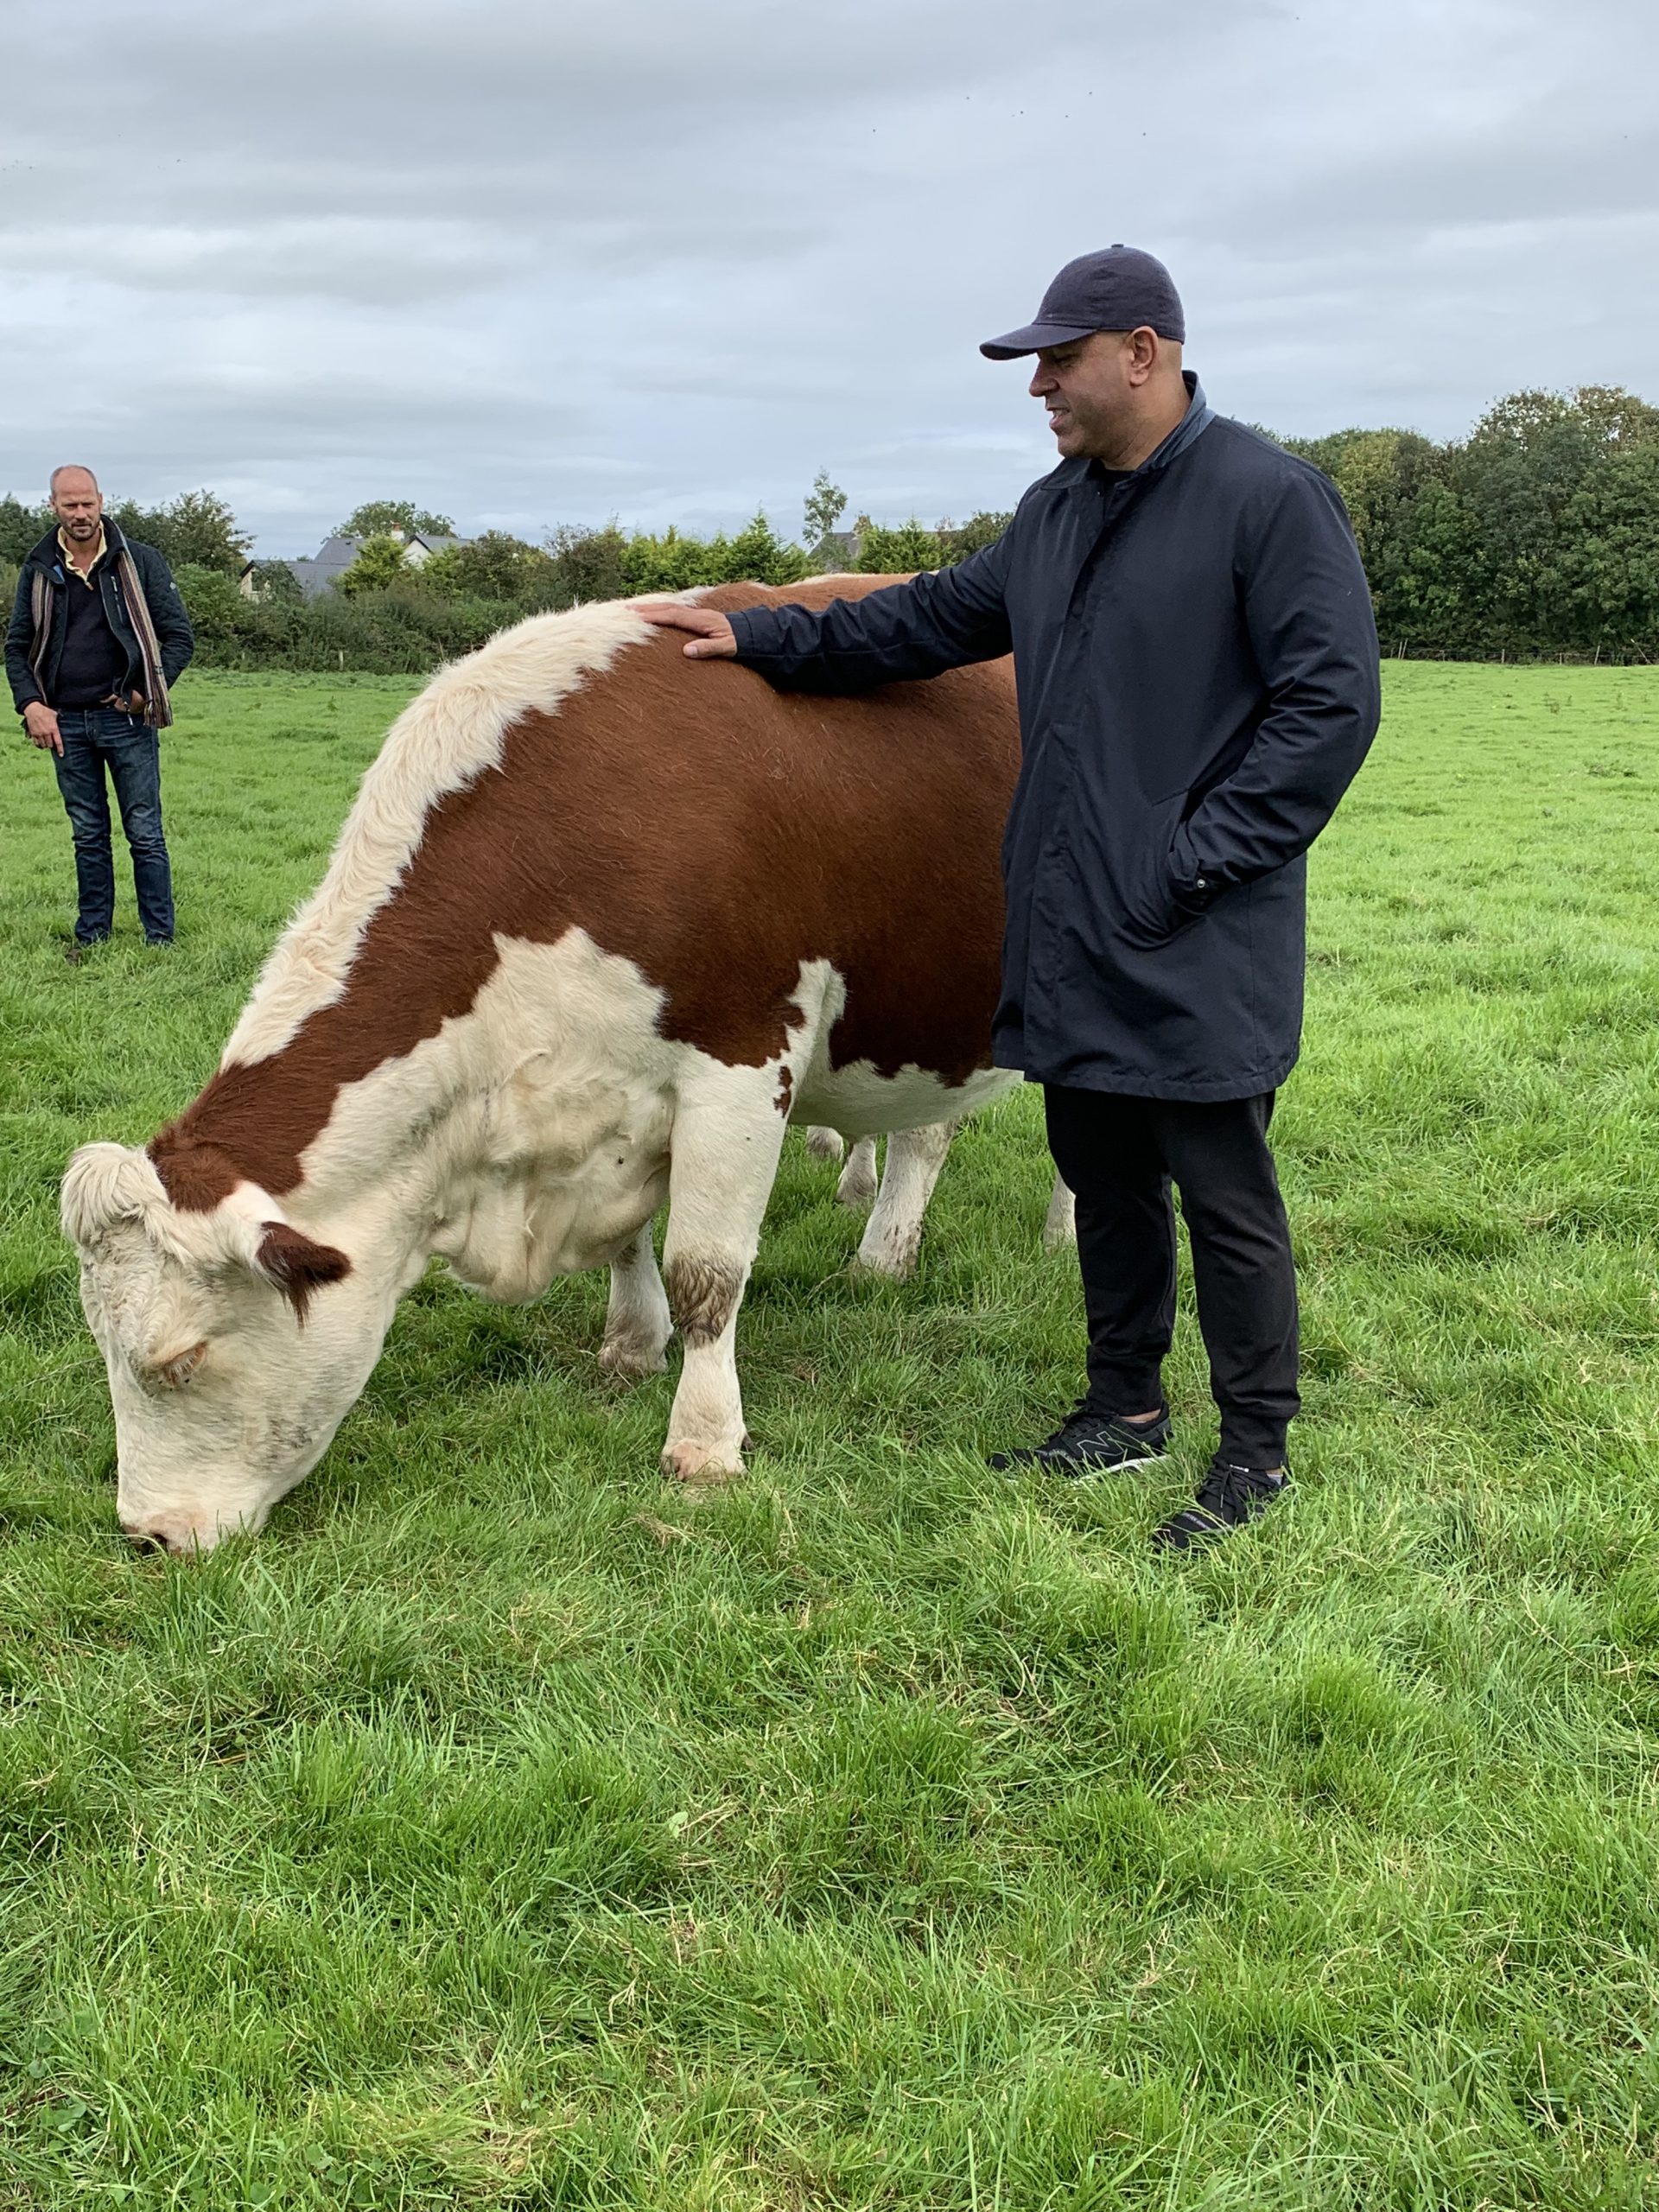 A chef in a field with his hand on a cow